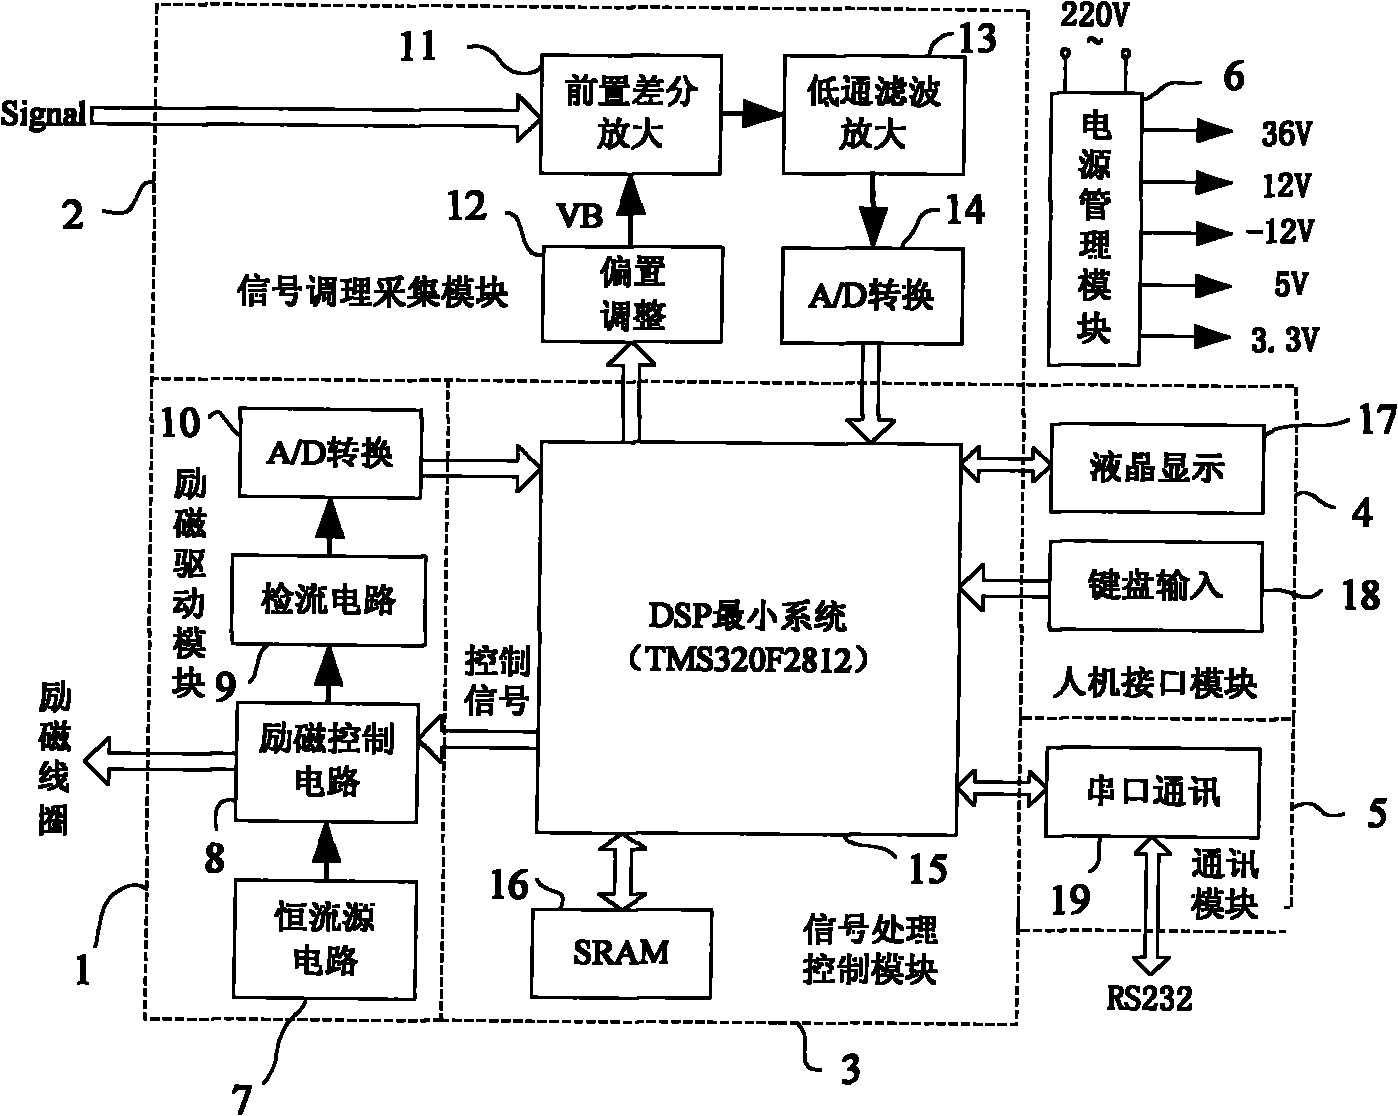 DSP-based electromagnetic flowmeter signal processing system